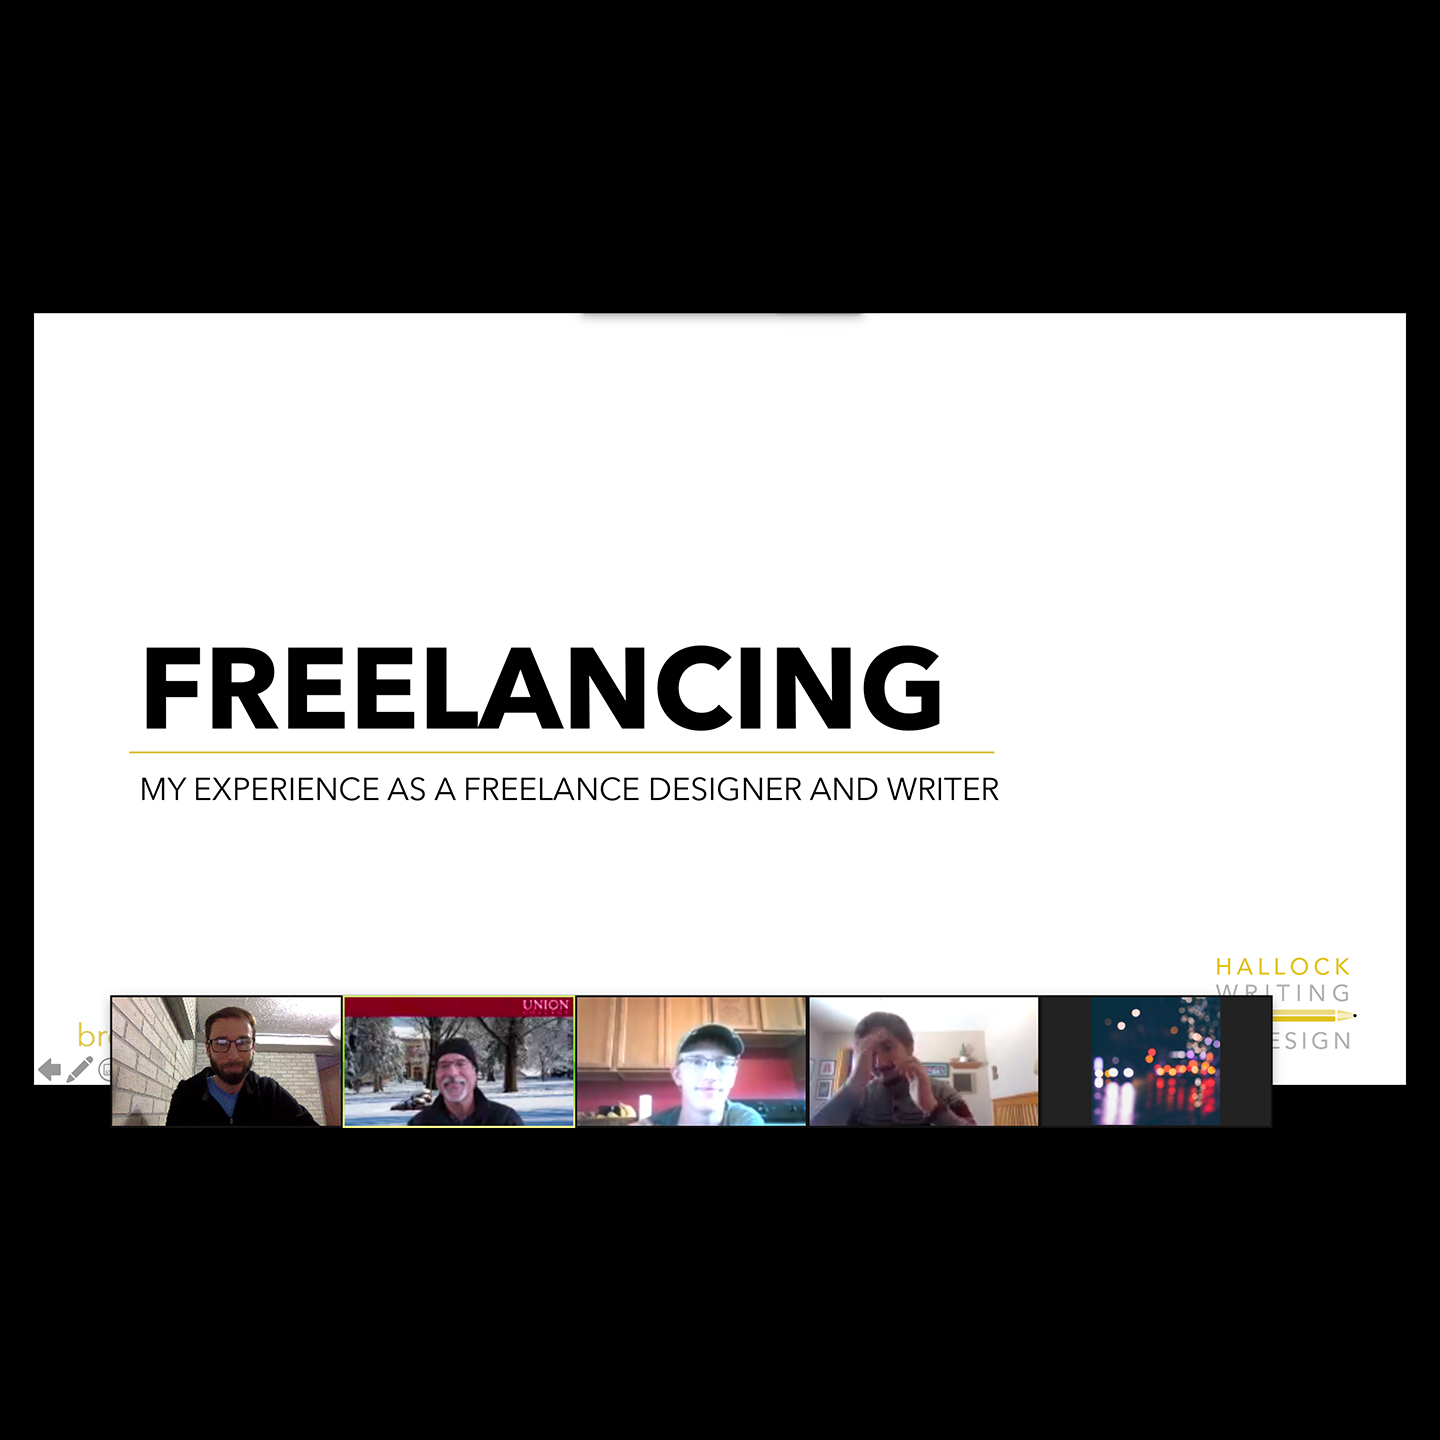 A few tips for future freelancers